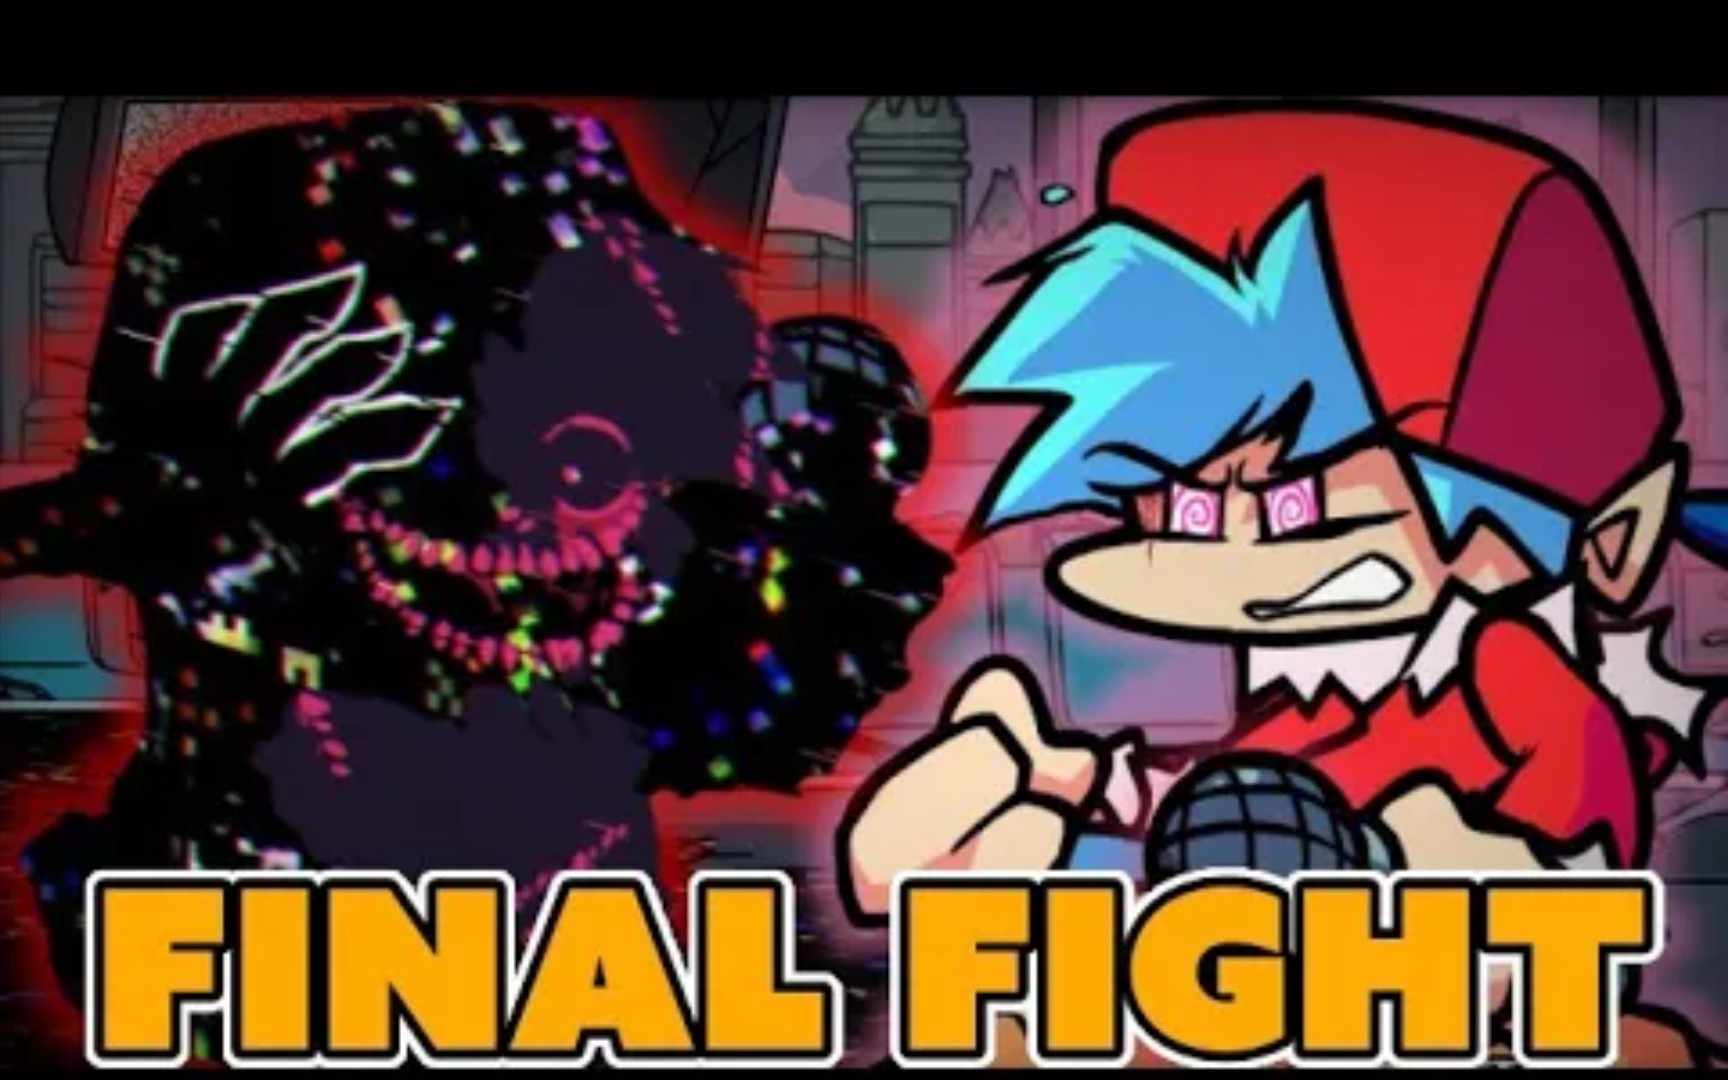 FCR: Final Fight but It's GLITCH EVIL BF vs SPIRIT BF Sing! | Final Fight Cover